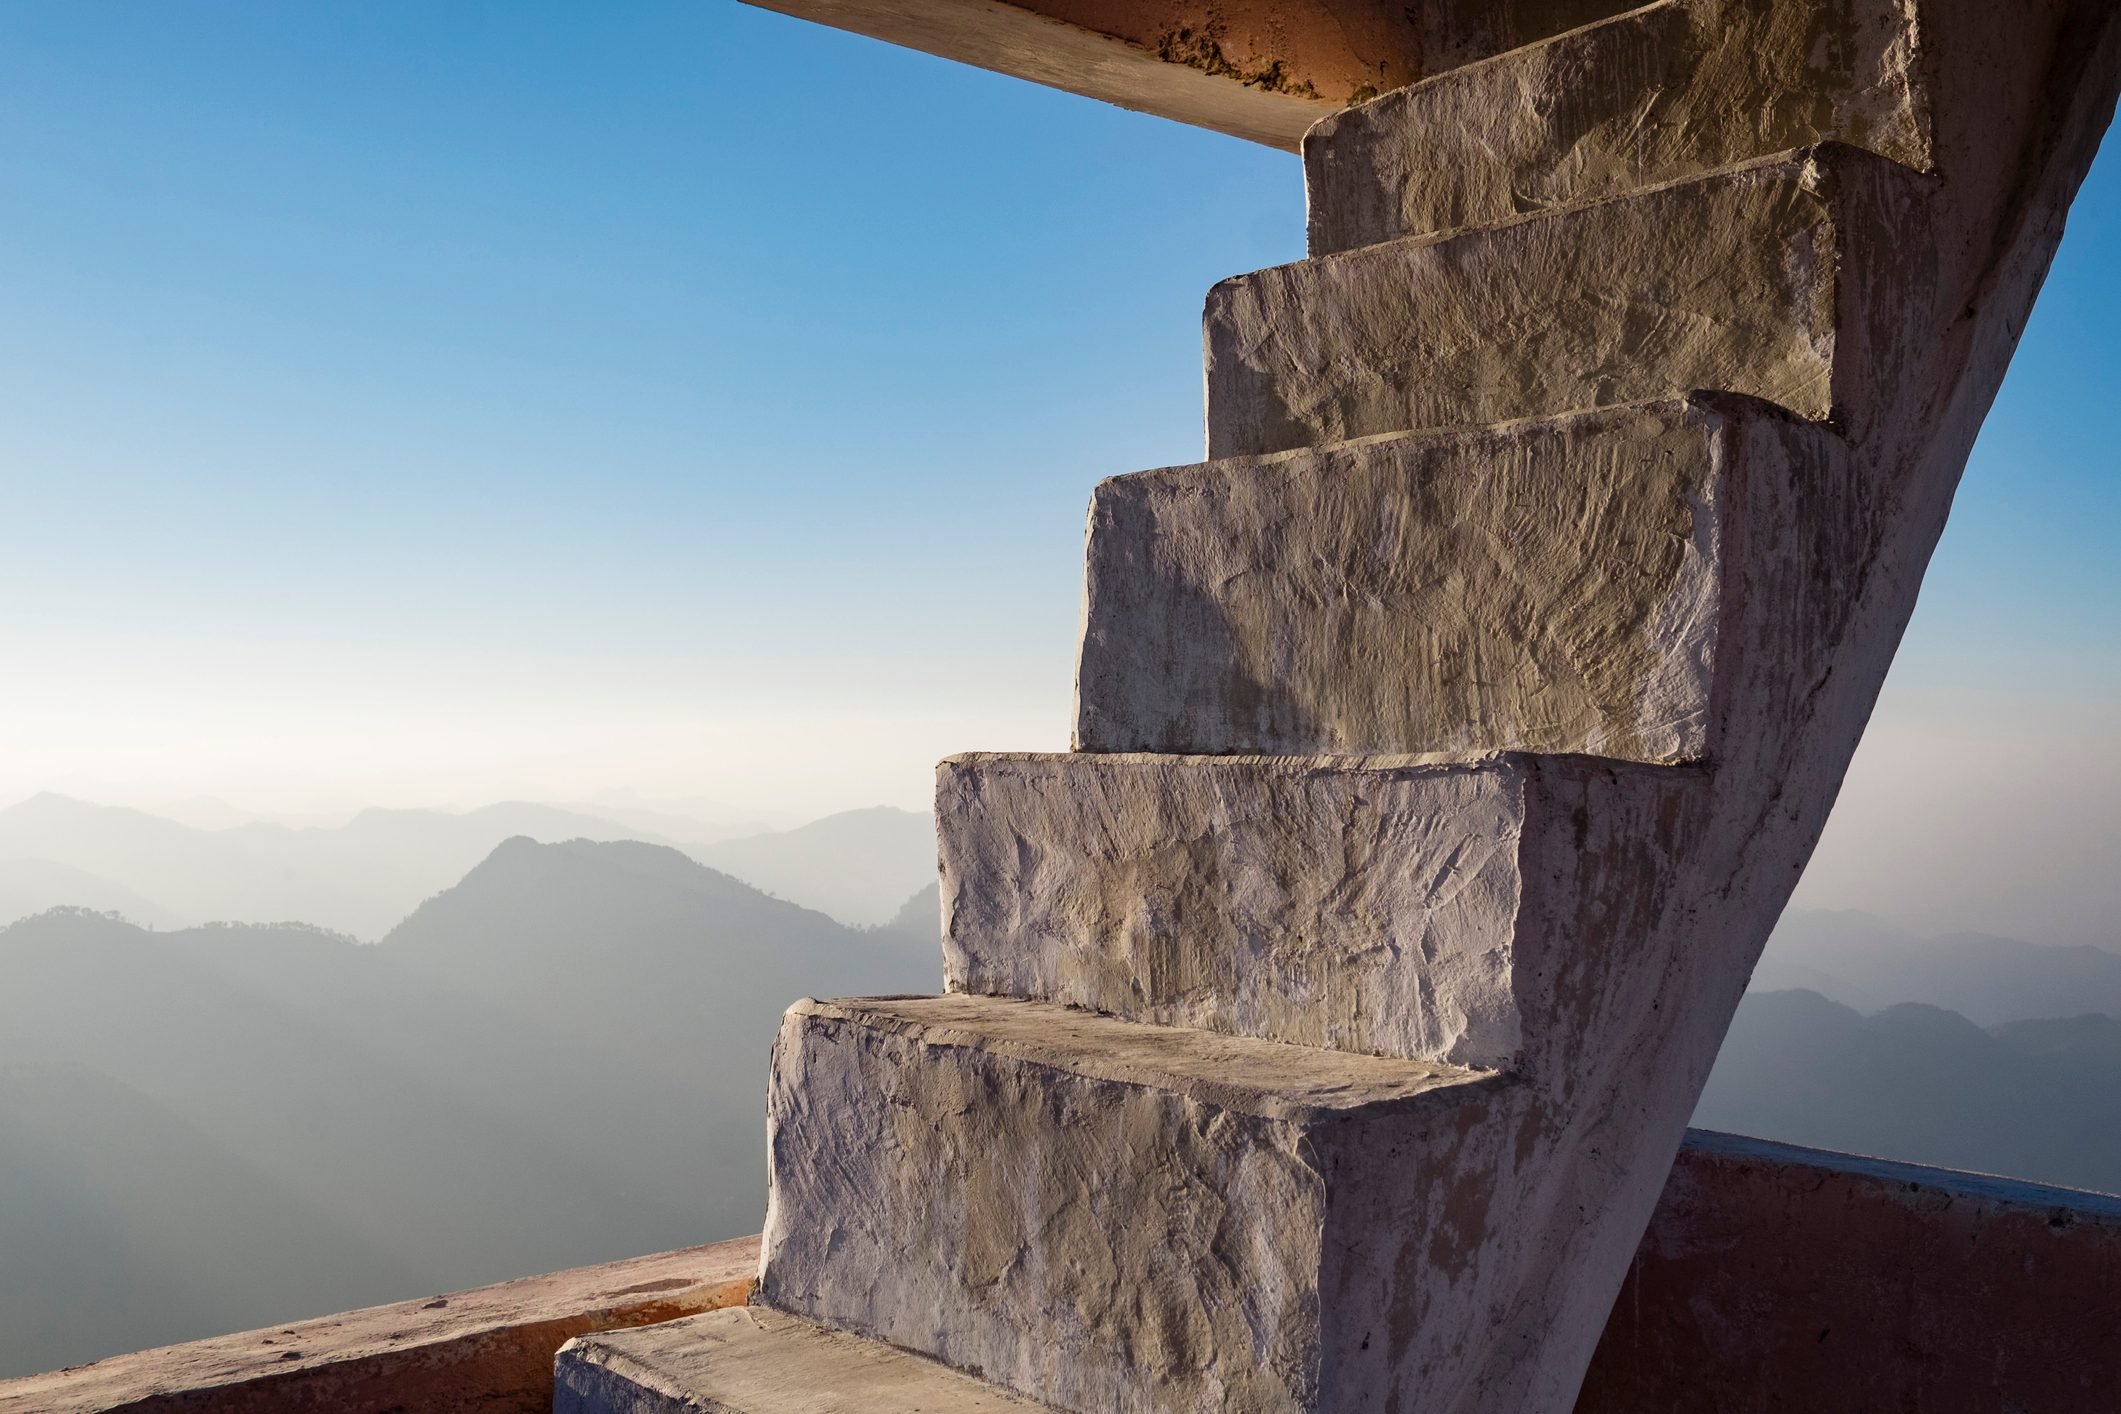 Concrete staircase overlooking scenic view of mountains